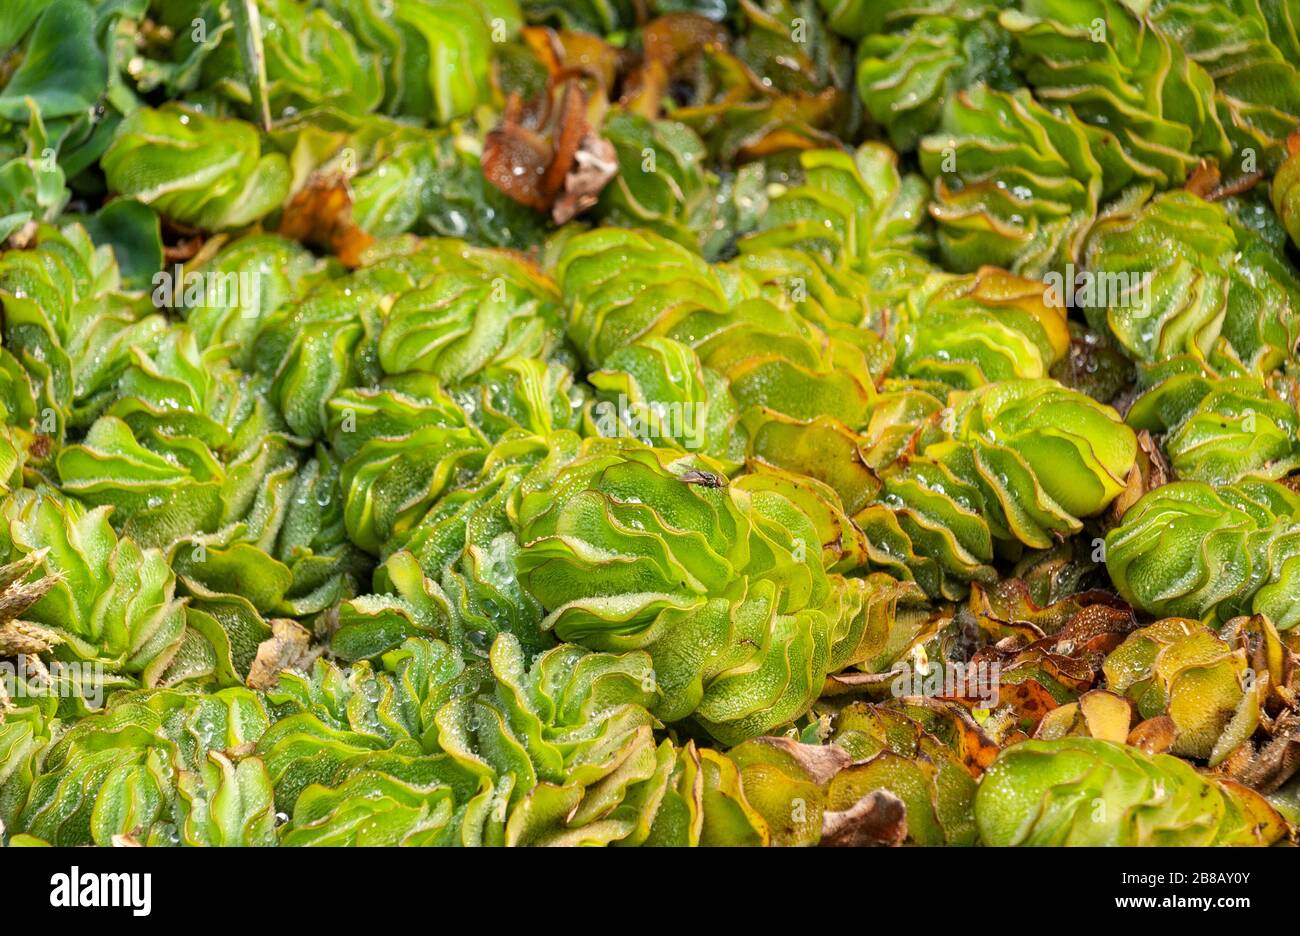 Water cabbage or water lettuce or Nile cabbage or shell flower Stock Photo